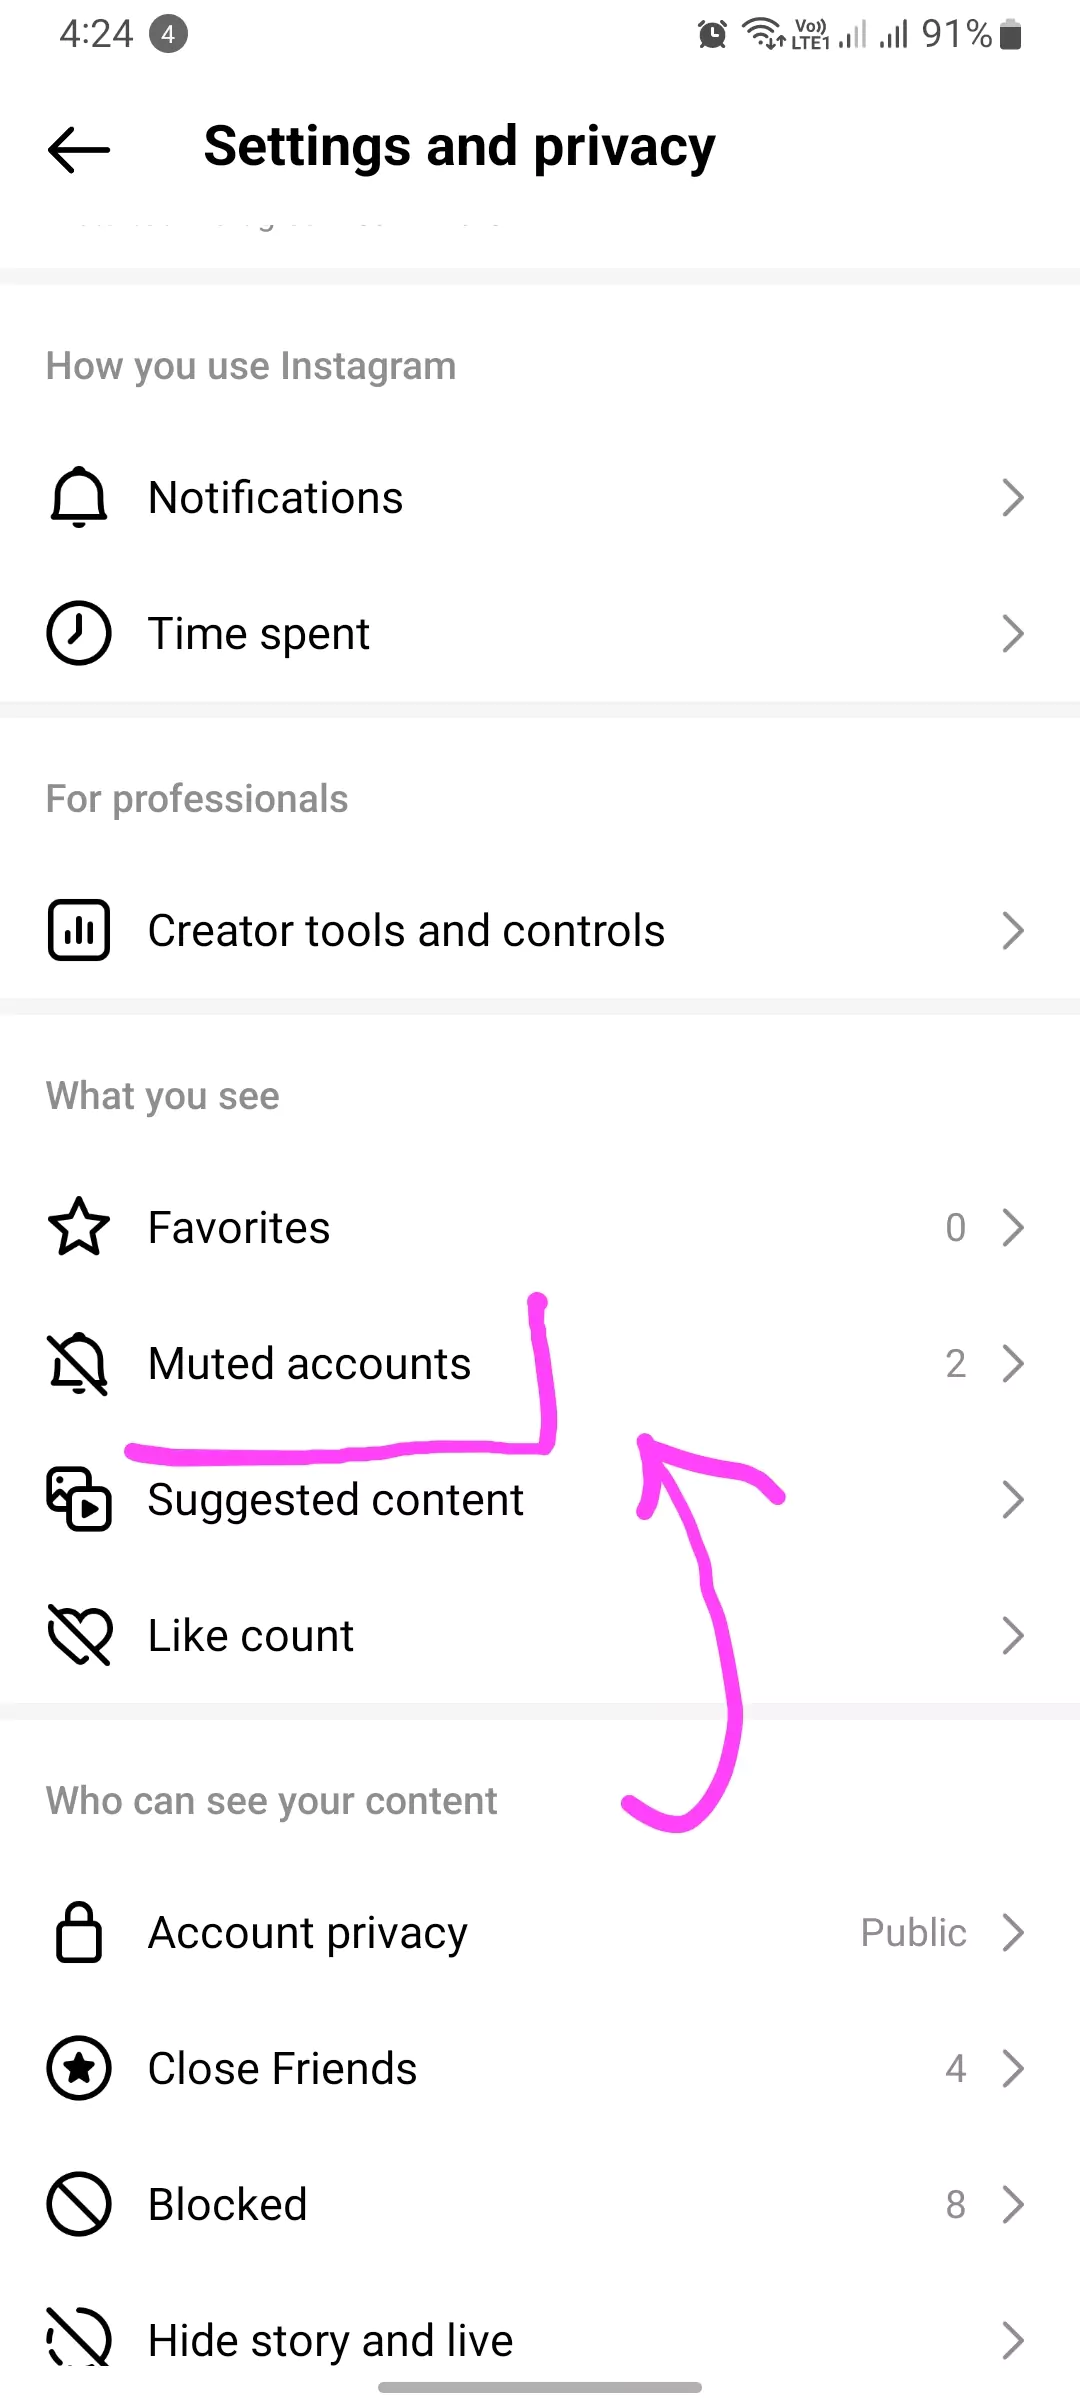 muted accounts highlighted on instagram app settings